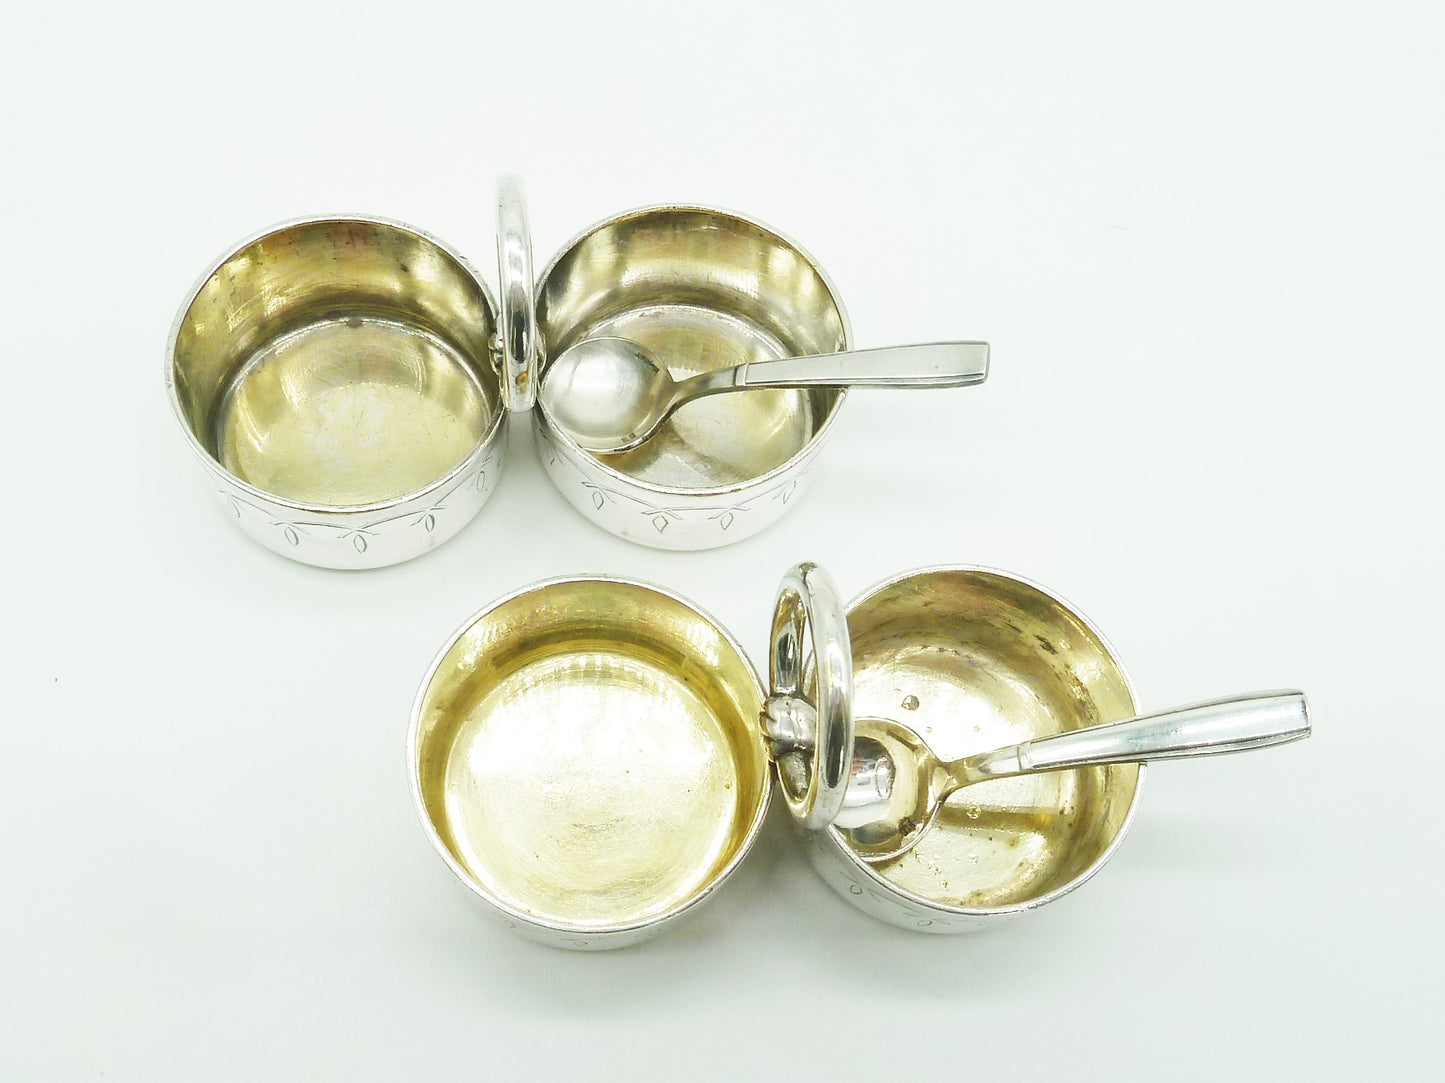 French silver gilt salt cellars with spoons - 43 Chesapeake Court Antiques